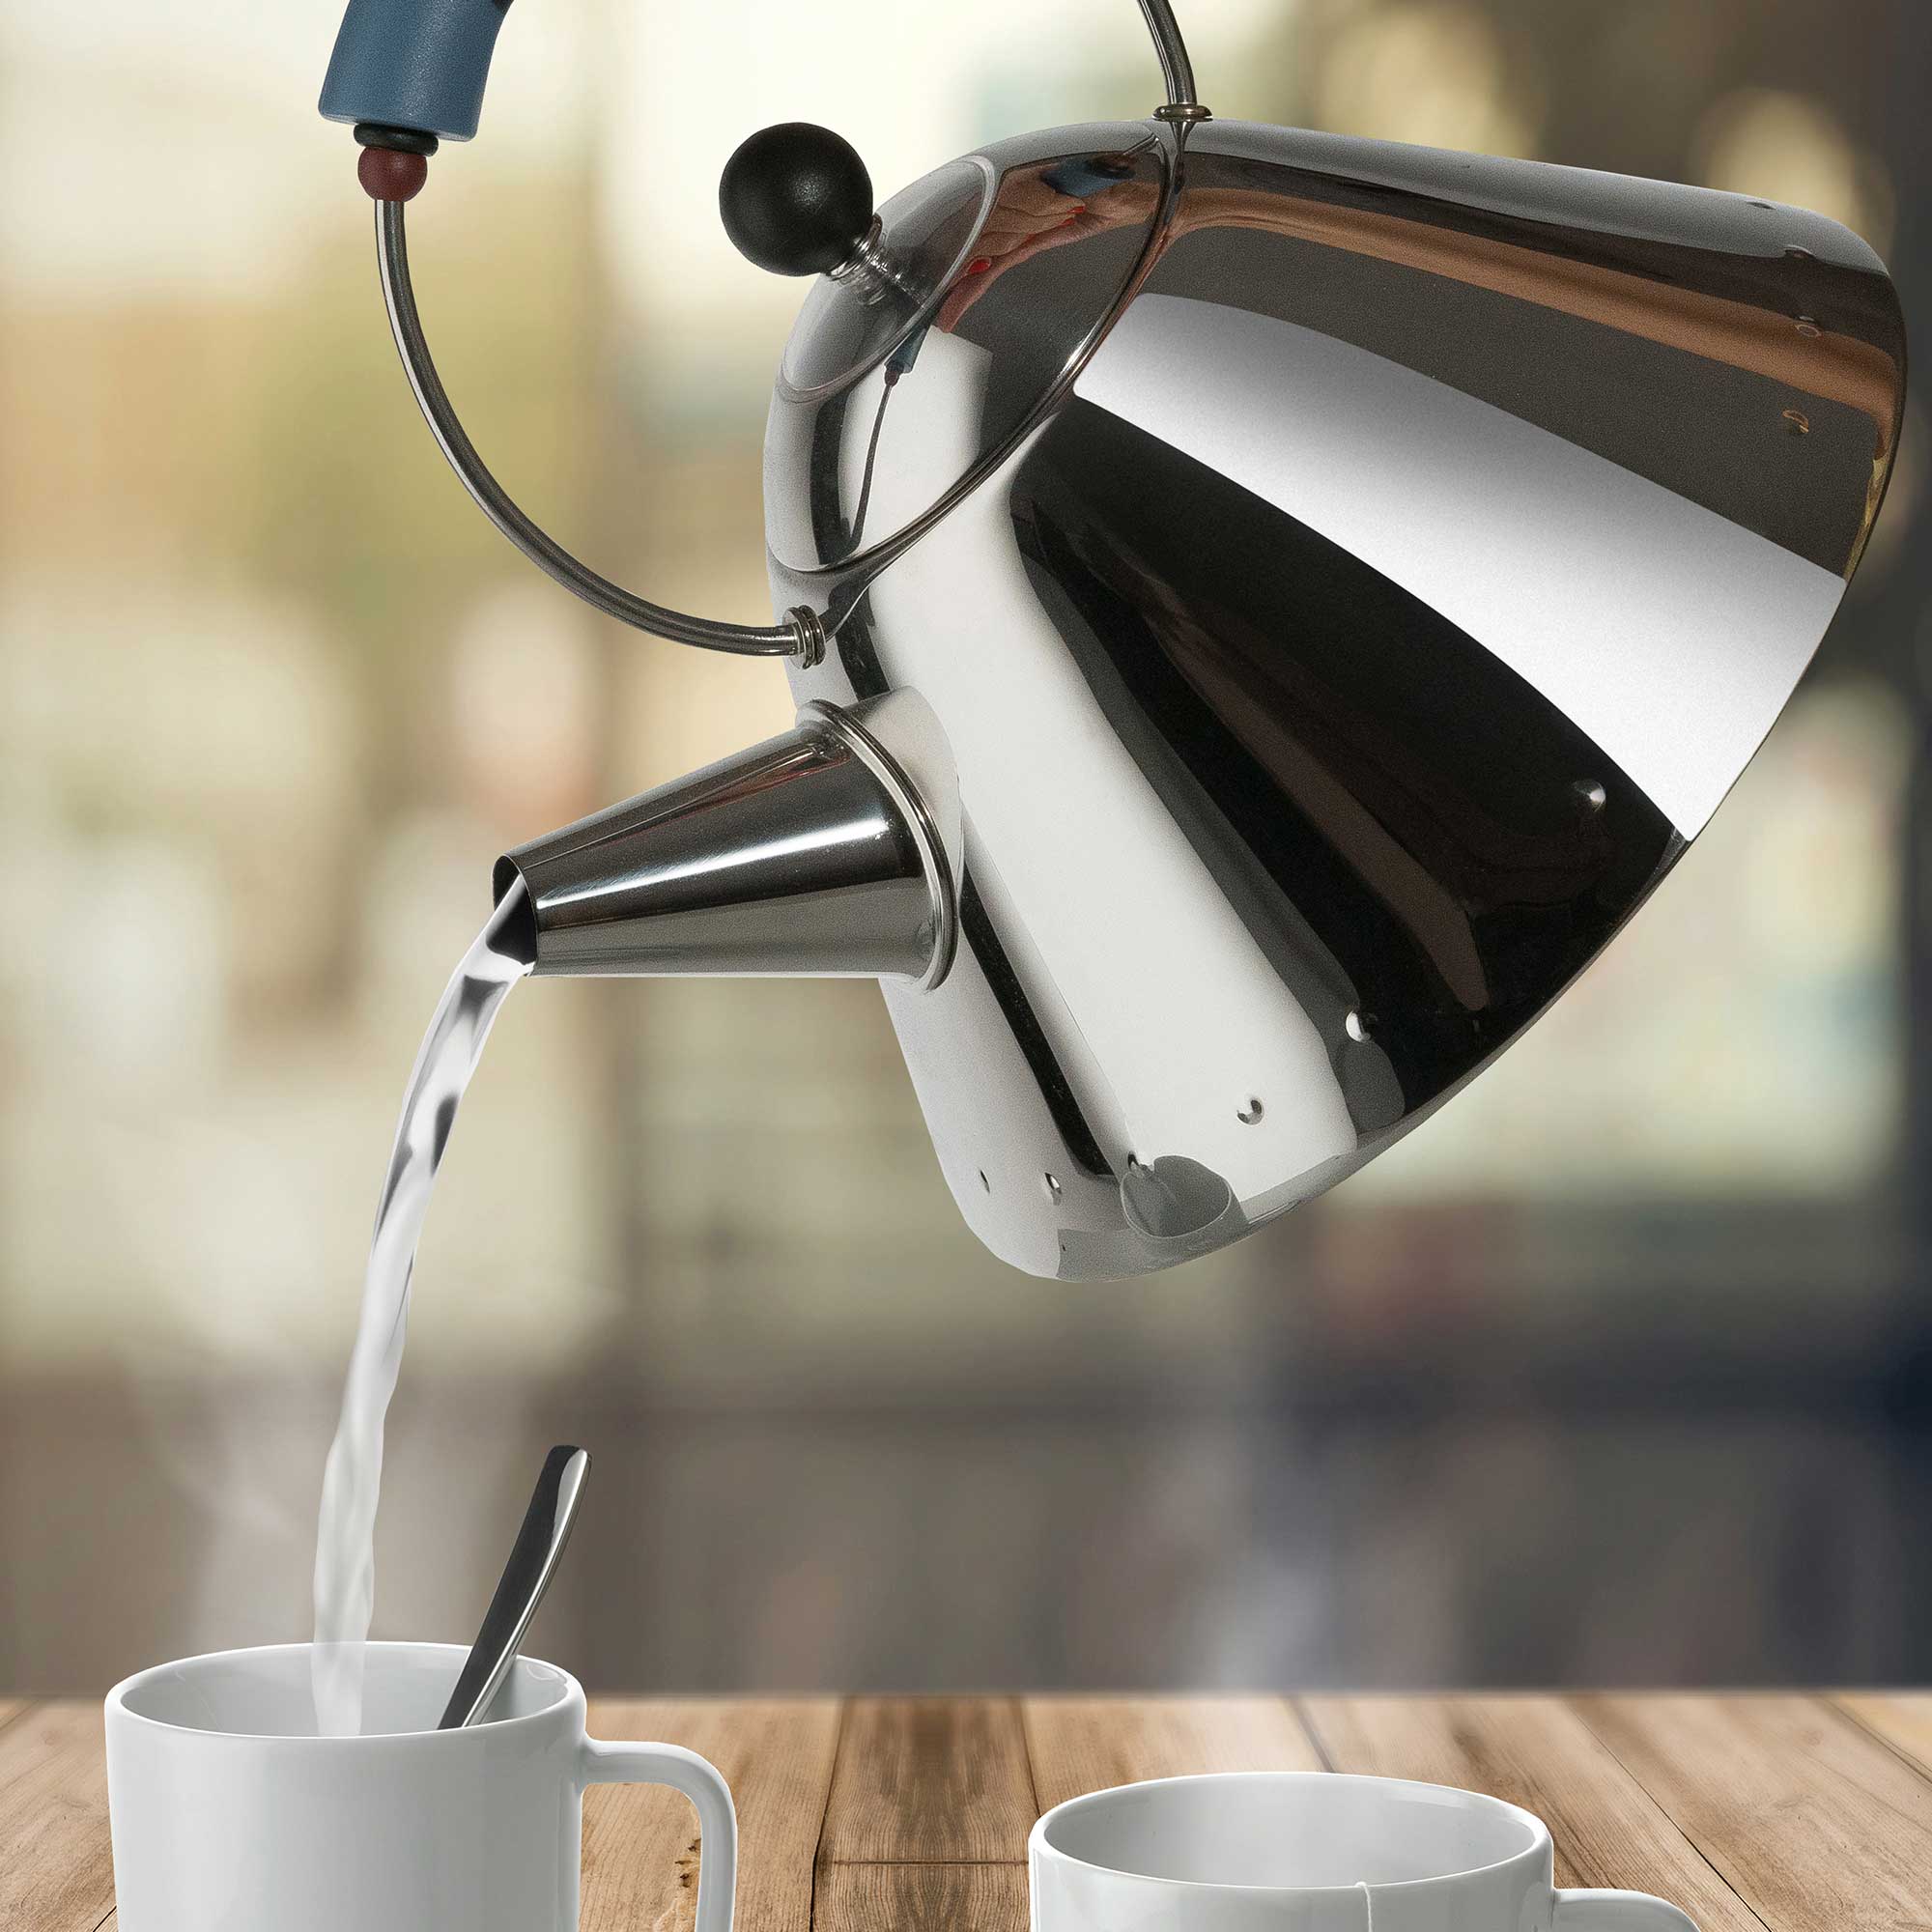 ALESSI 9093 - HOT WATER TEA KETTLE with BLUE BIRD WHISTLE